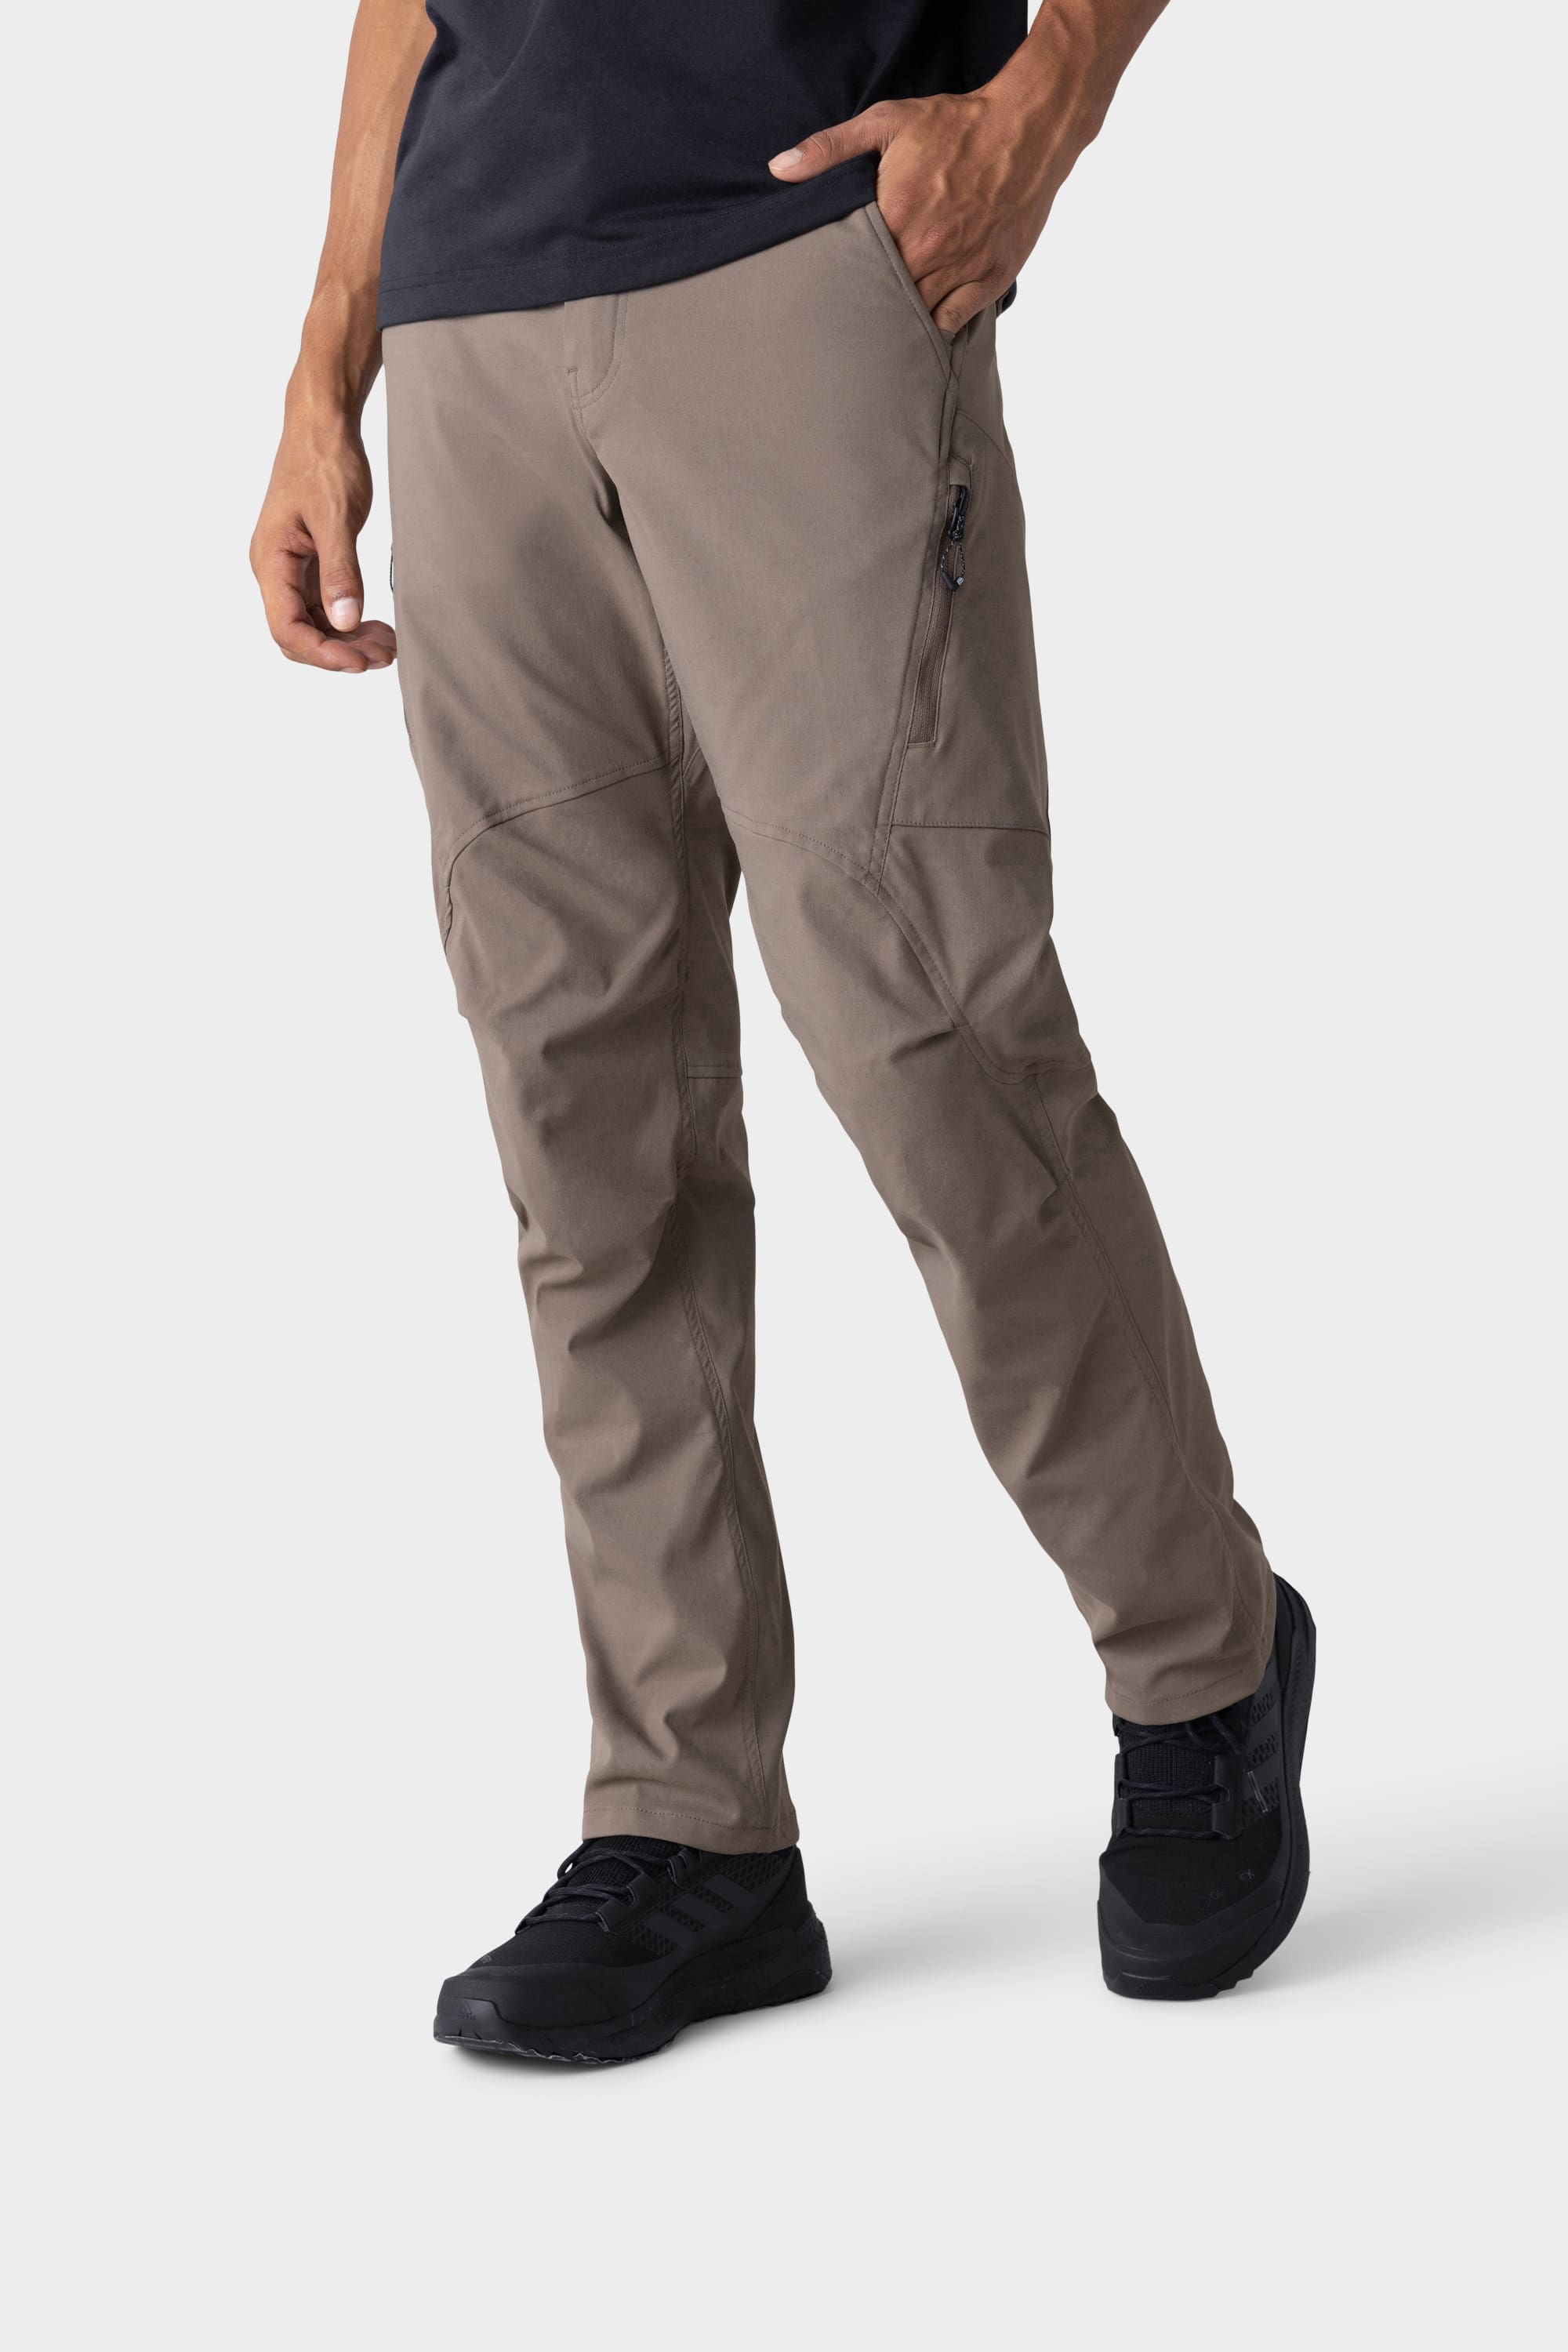 Becka Crossover Cargo Pant – SANITY